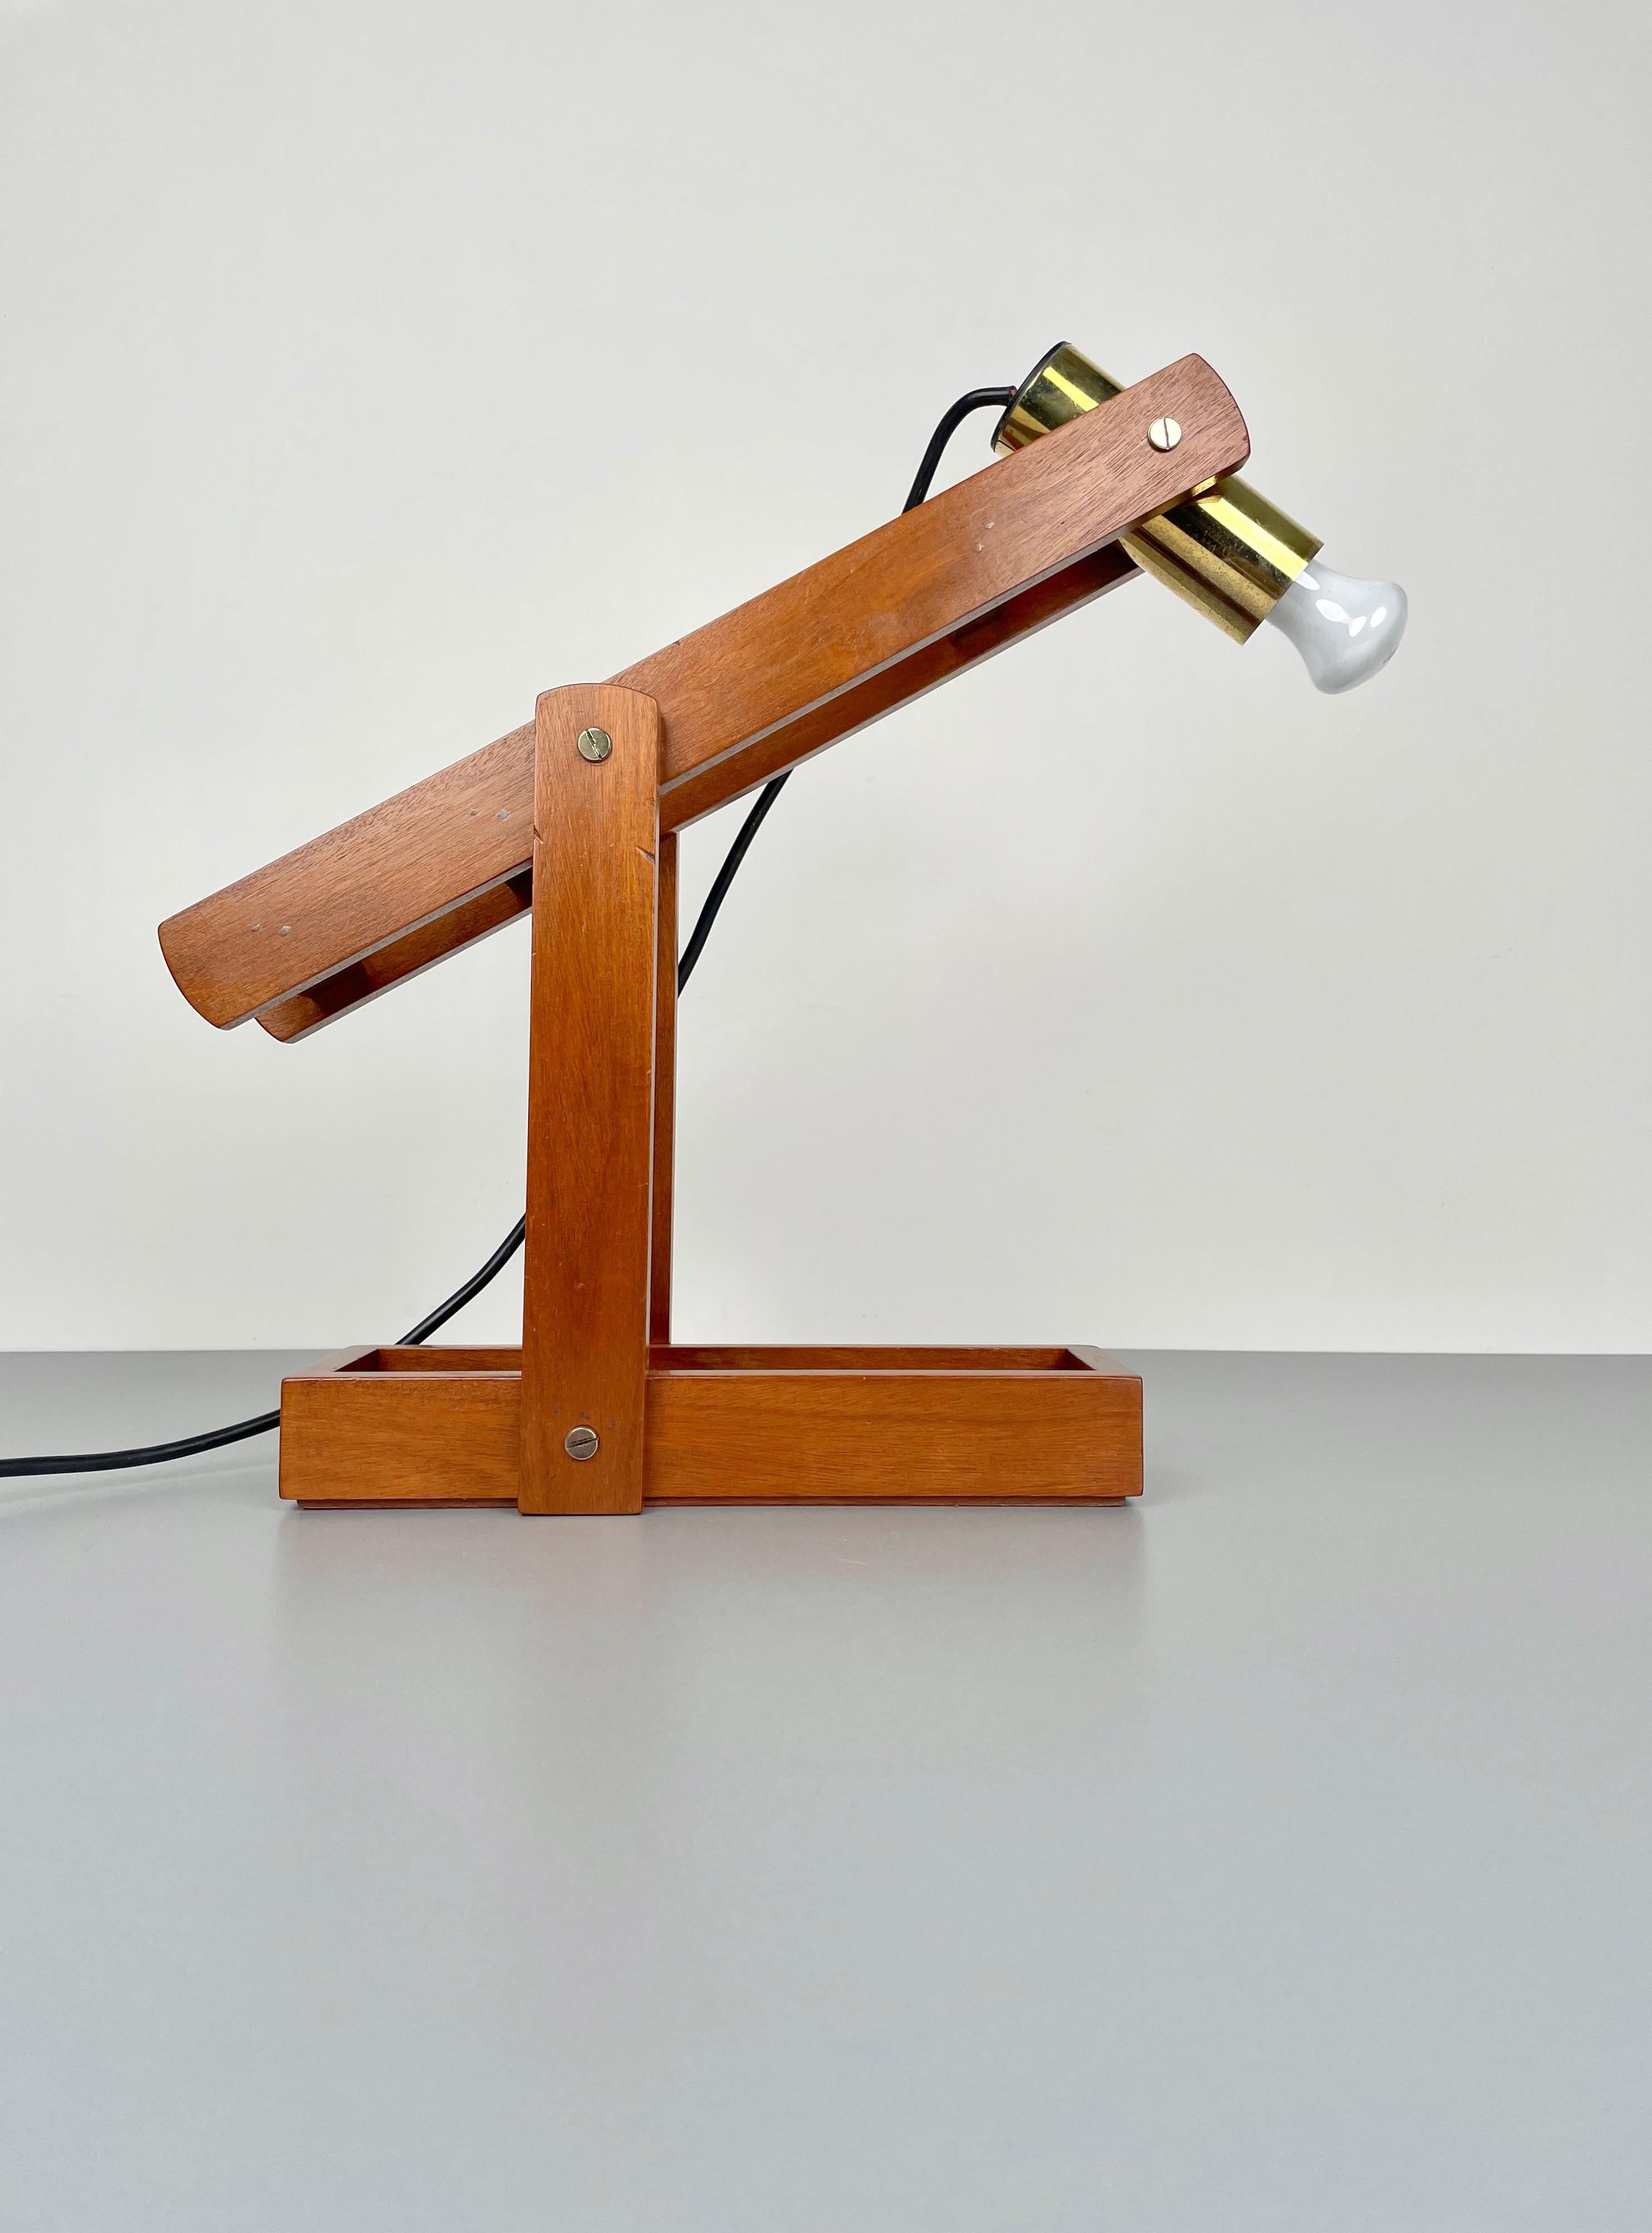 Adjustable Wood & Brass Table Lamp, Italy, 1960s For Sale 3